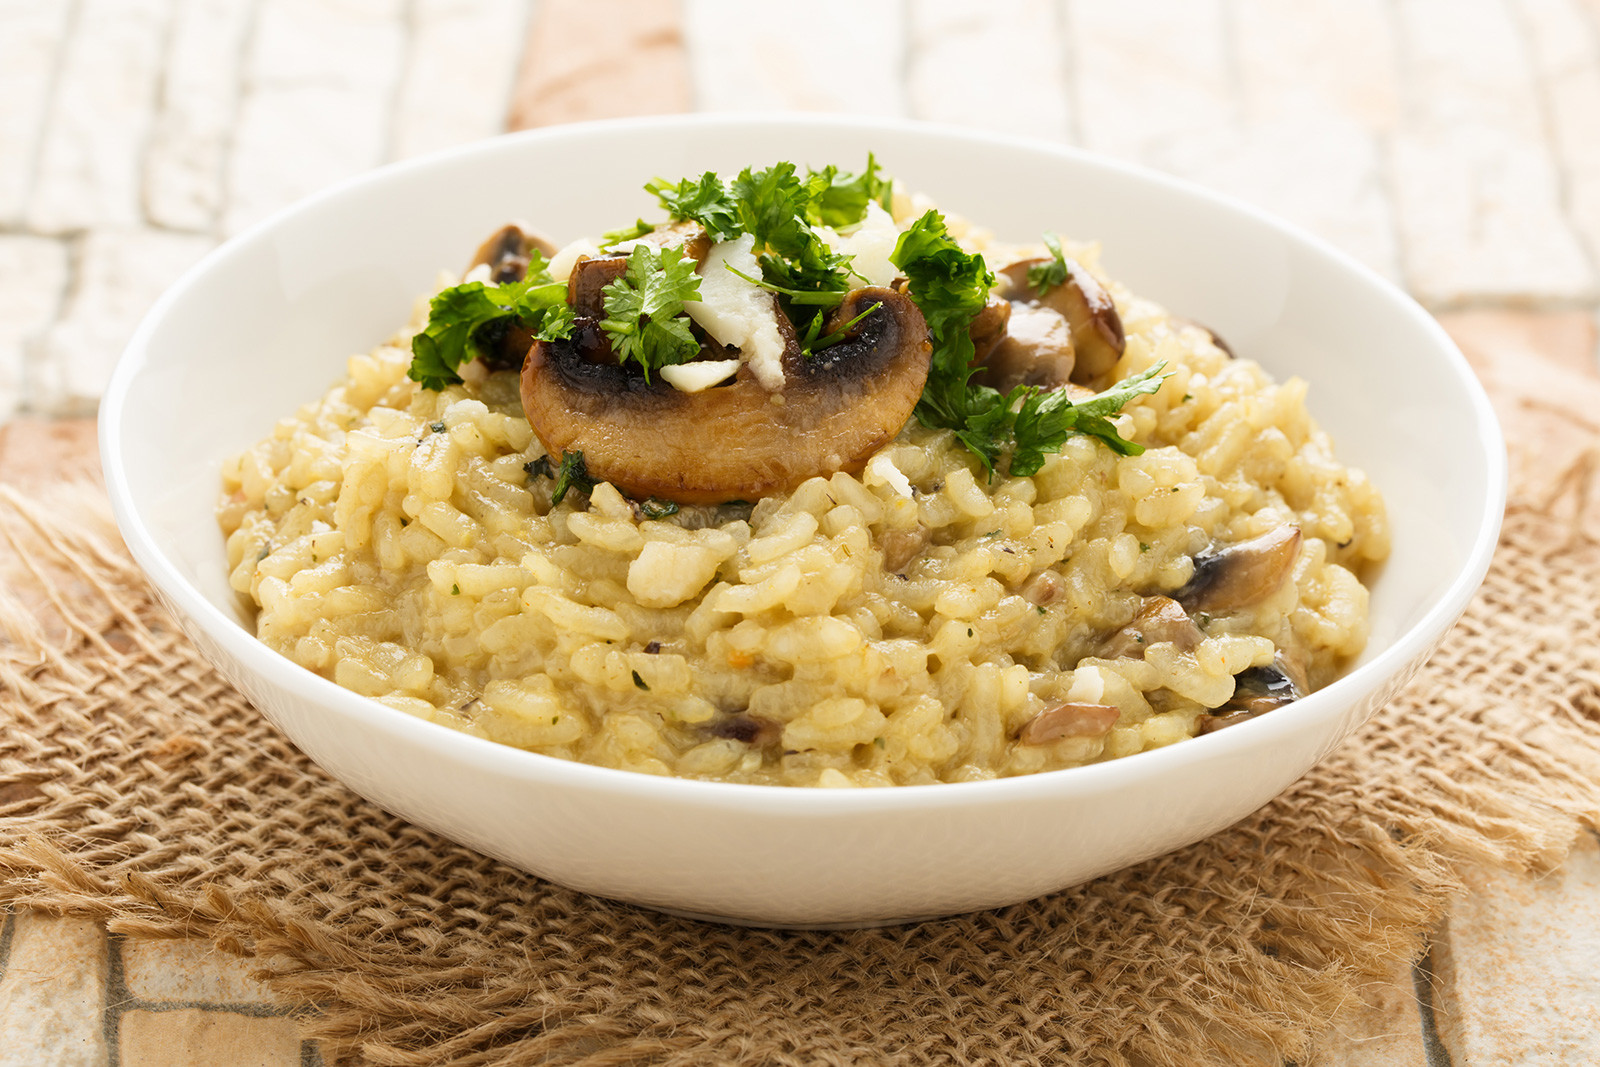 Mushroom risotto with fresh herbs, Parmesan cheese and a bunch of mushrooms on top of it, in a white bowl.